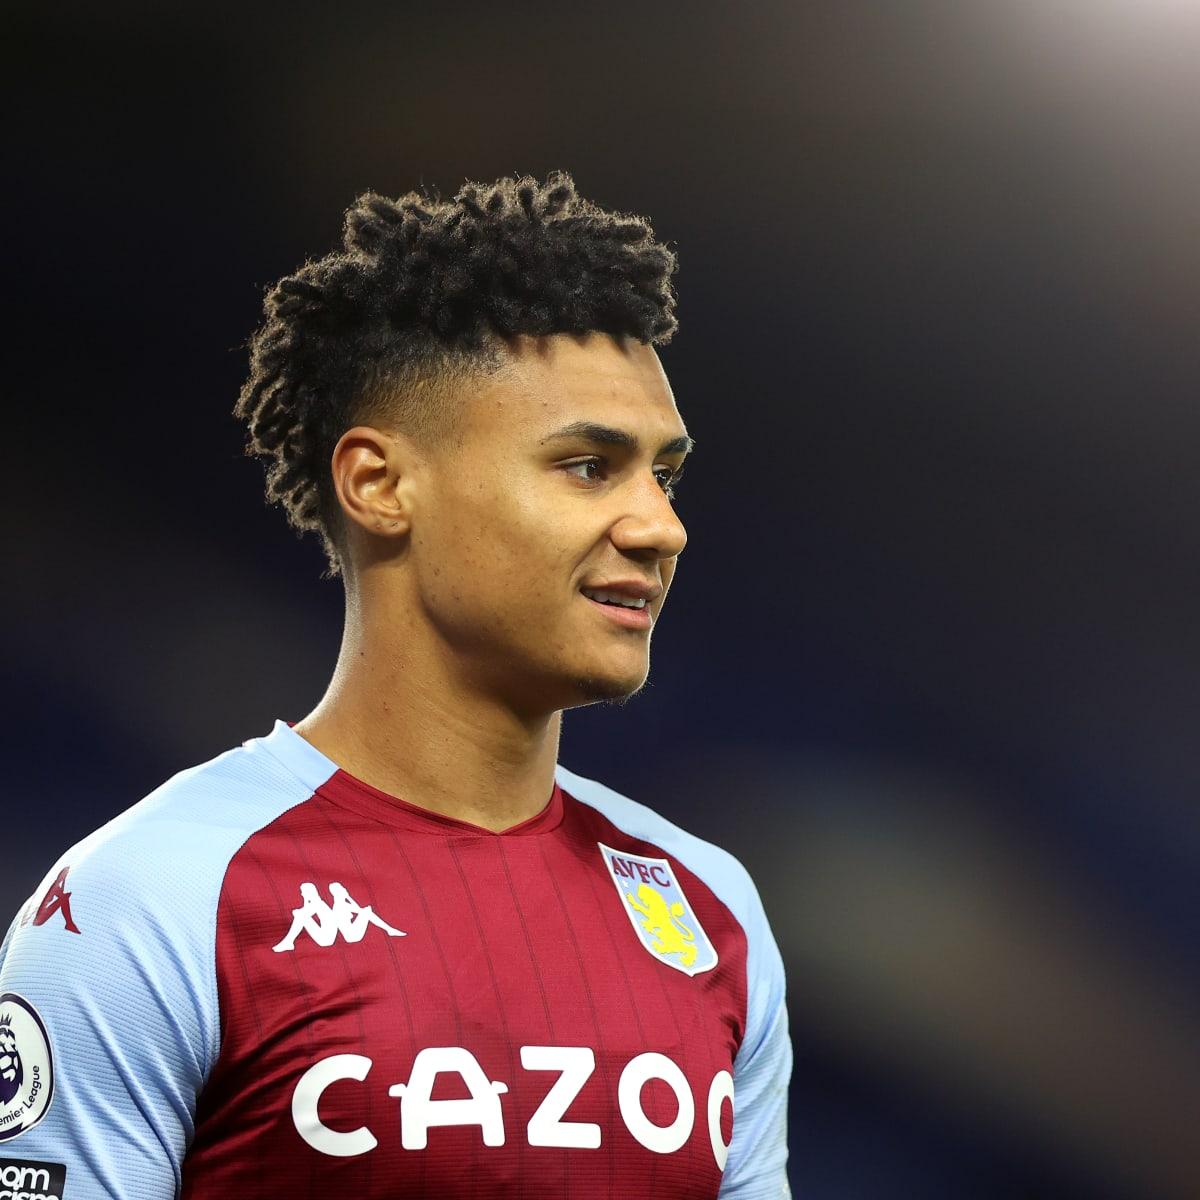 Liverpool Legend Robbie Fowler Says Aston Villa's Ollie Watkins "Looks Like  A Klopp Player" - Sports Illustrated Liverpool FC News, Analysis, and More